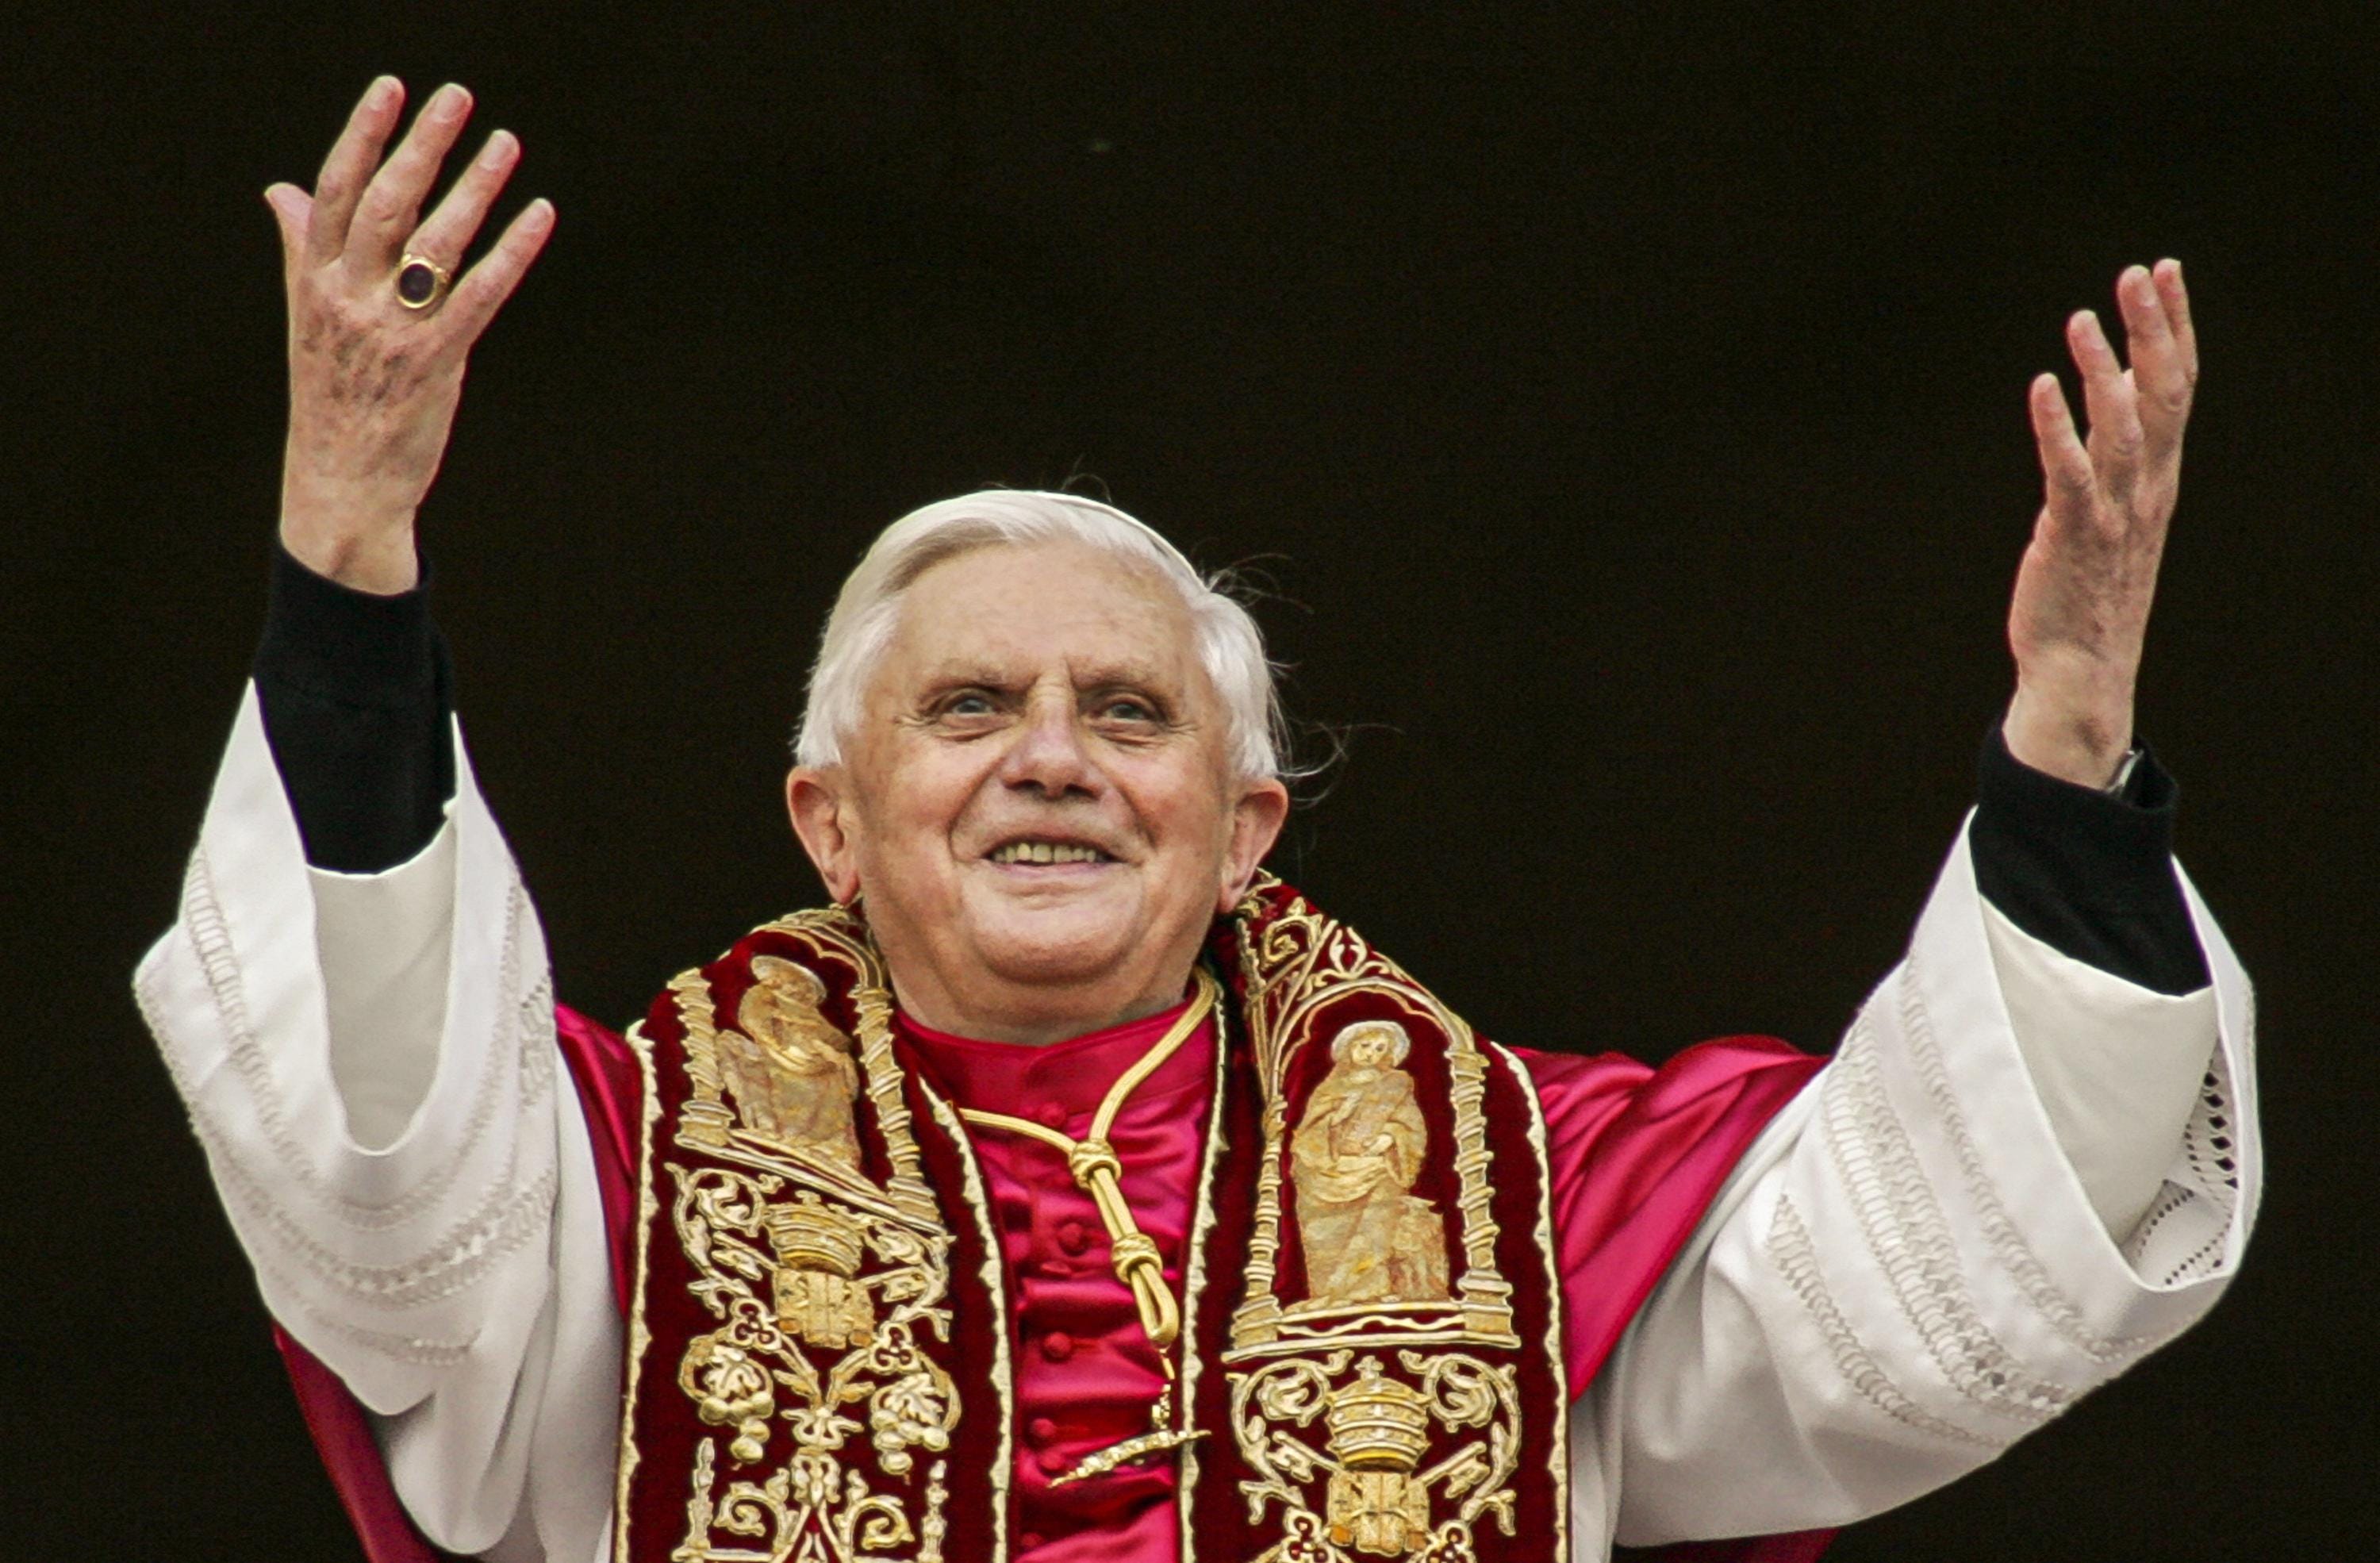 #26 - A Eulogy for Pope Benedict XVI